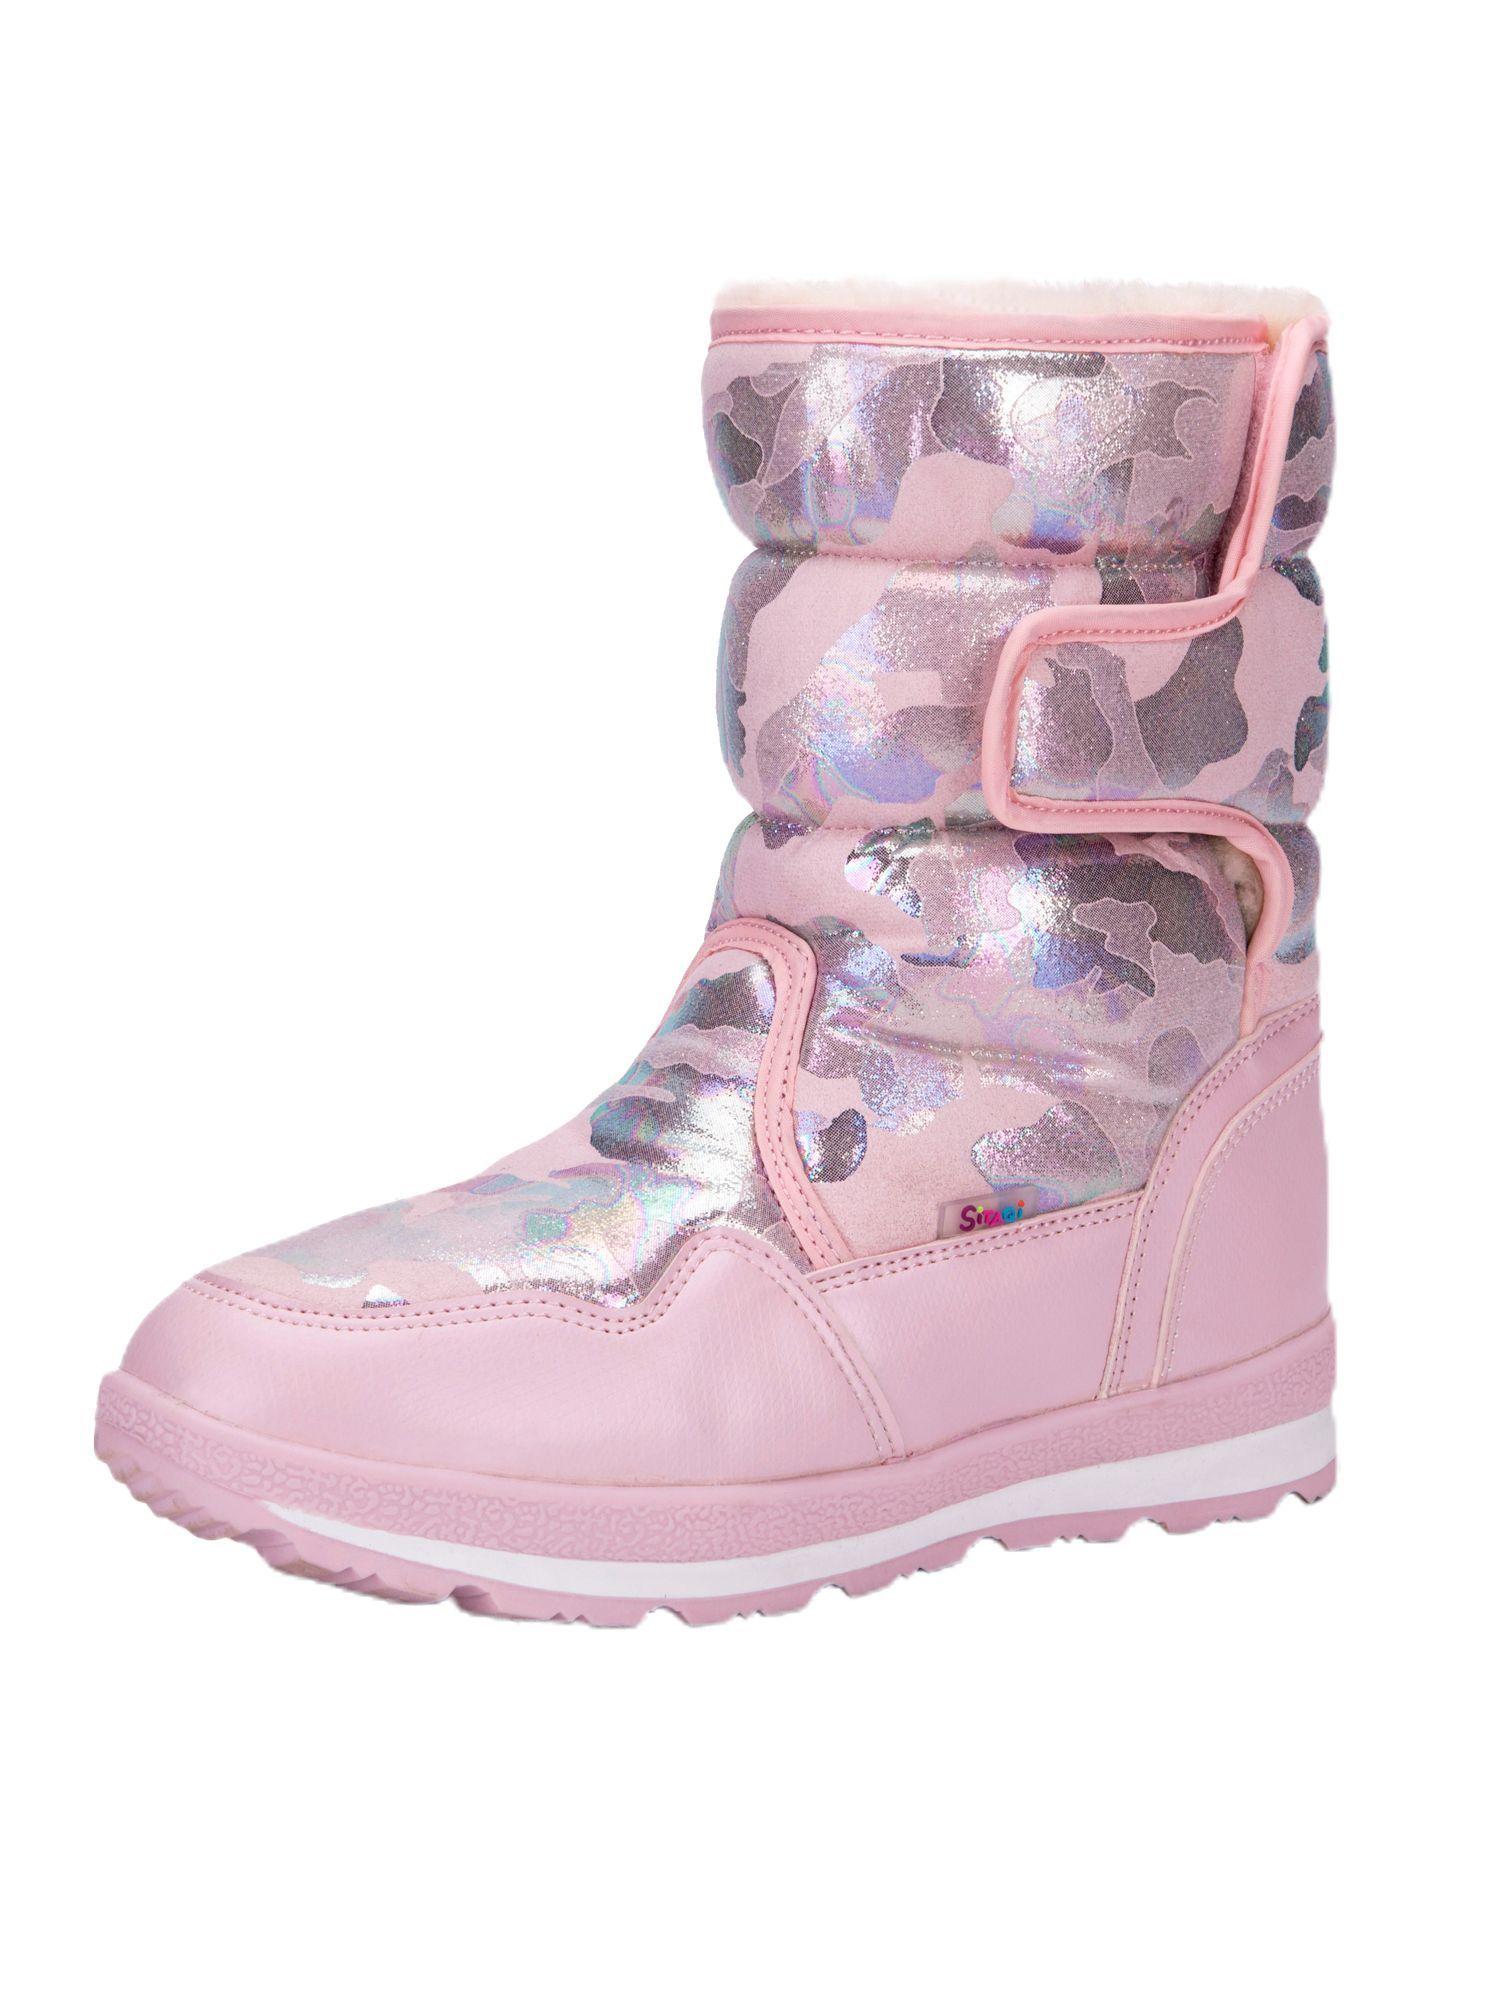 pink-and-silver-glam-girls-winter-snow-boots